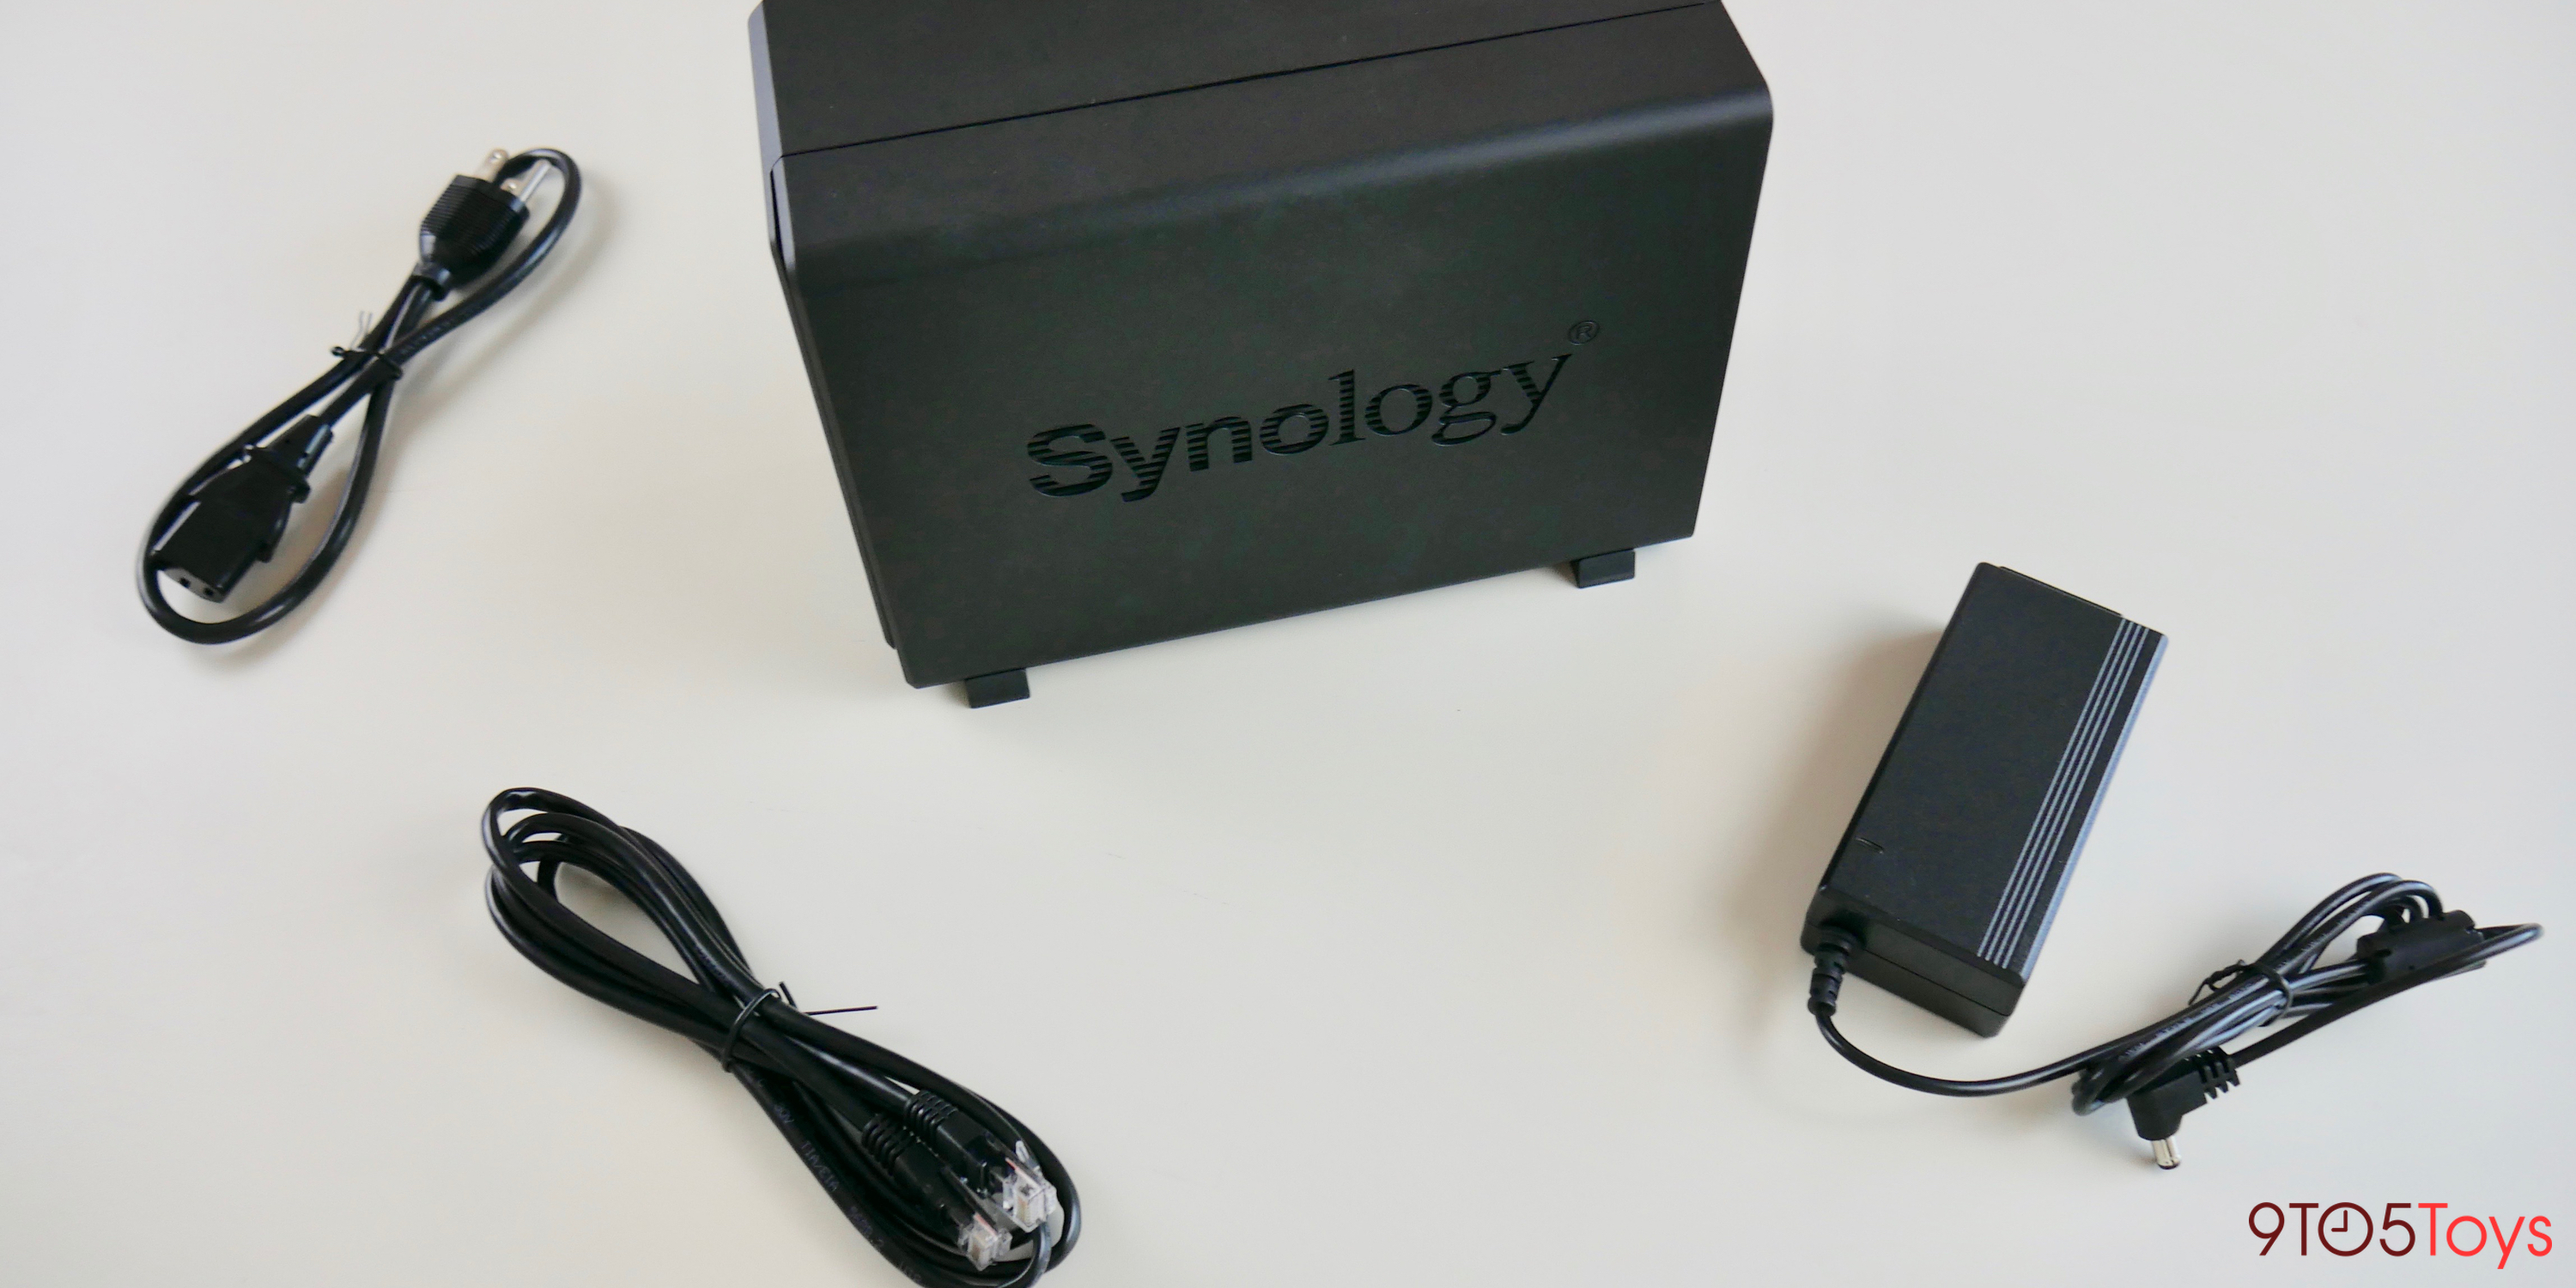 What's included with the Synology DS218play